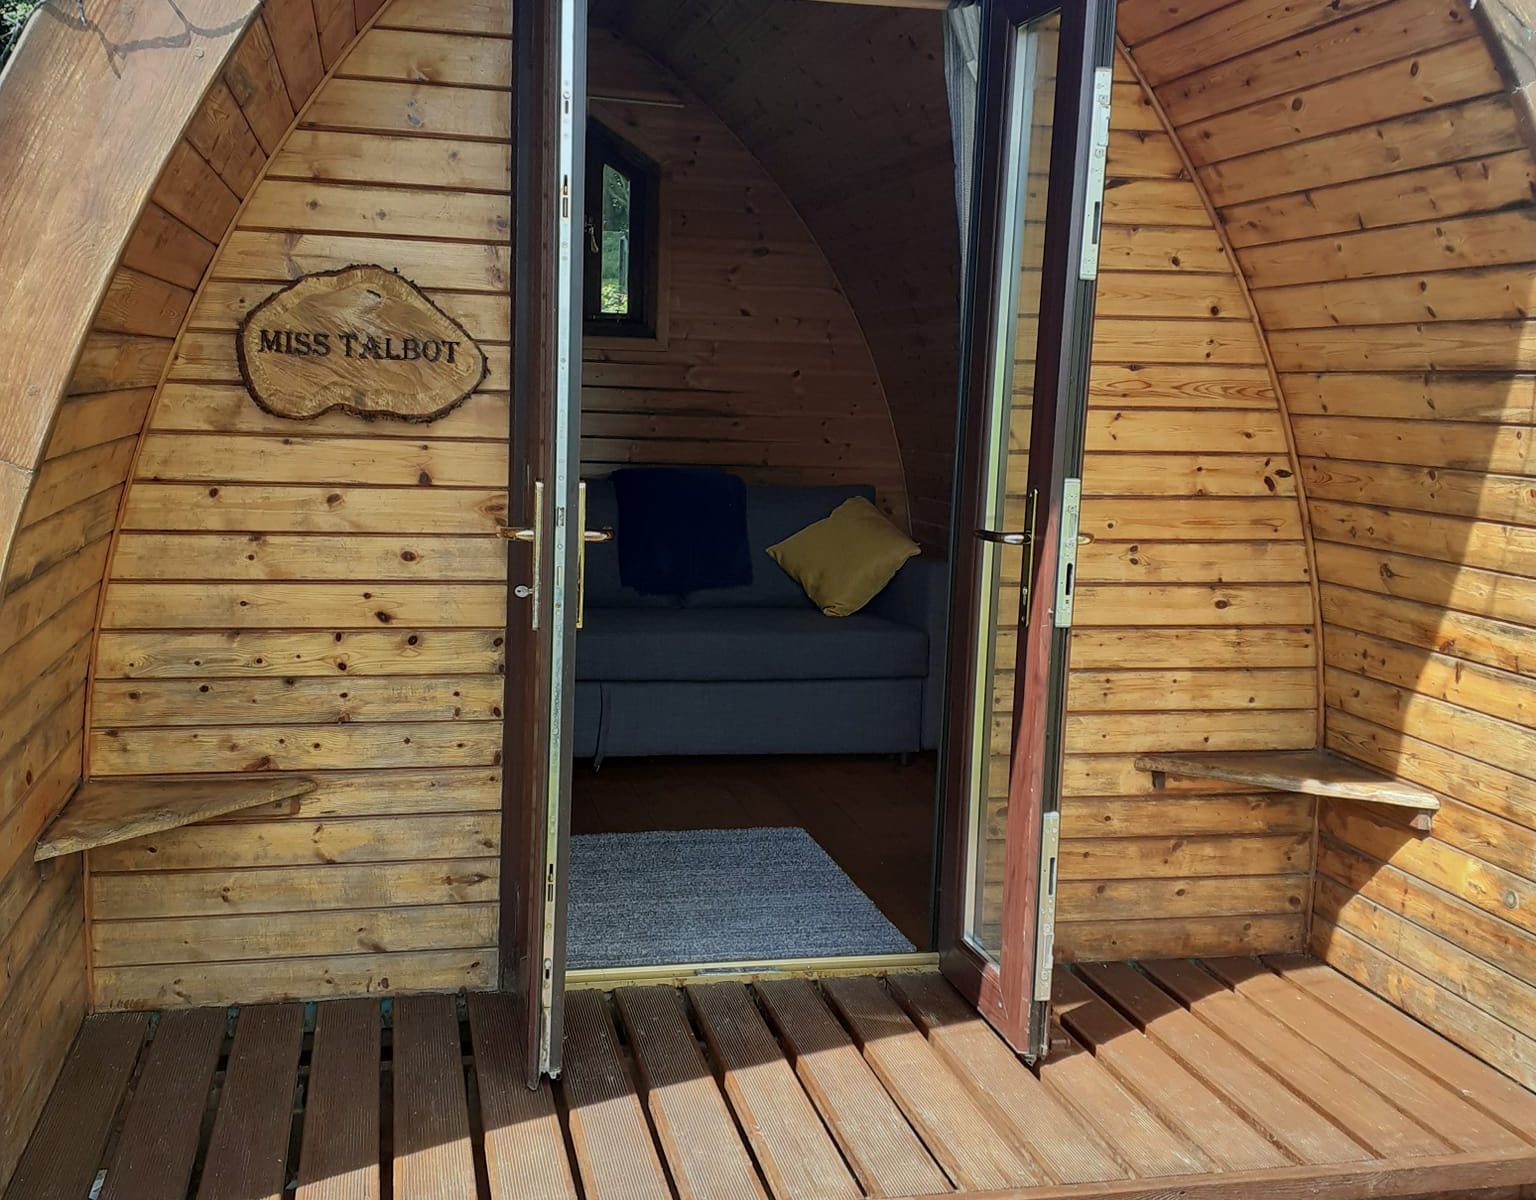 Miss Talbot Glamping Pod, South Wales